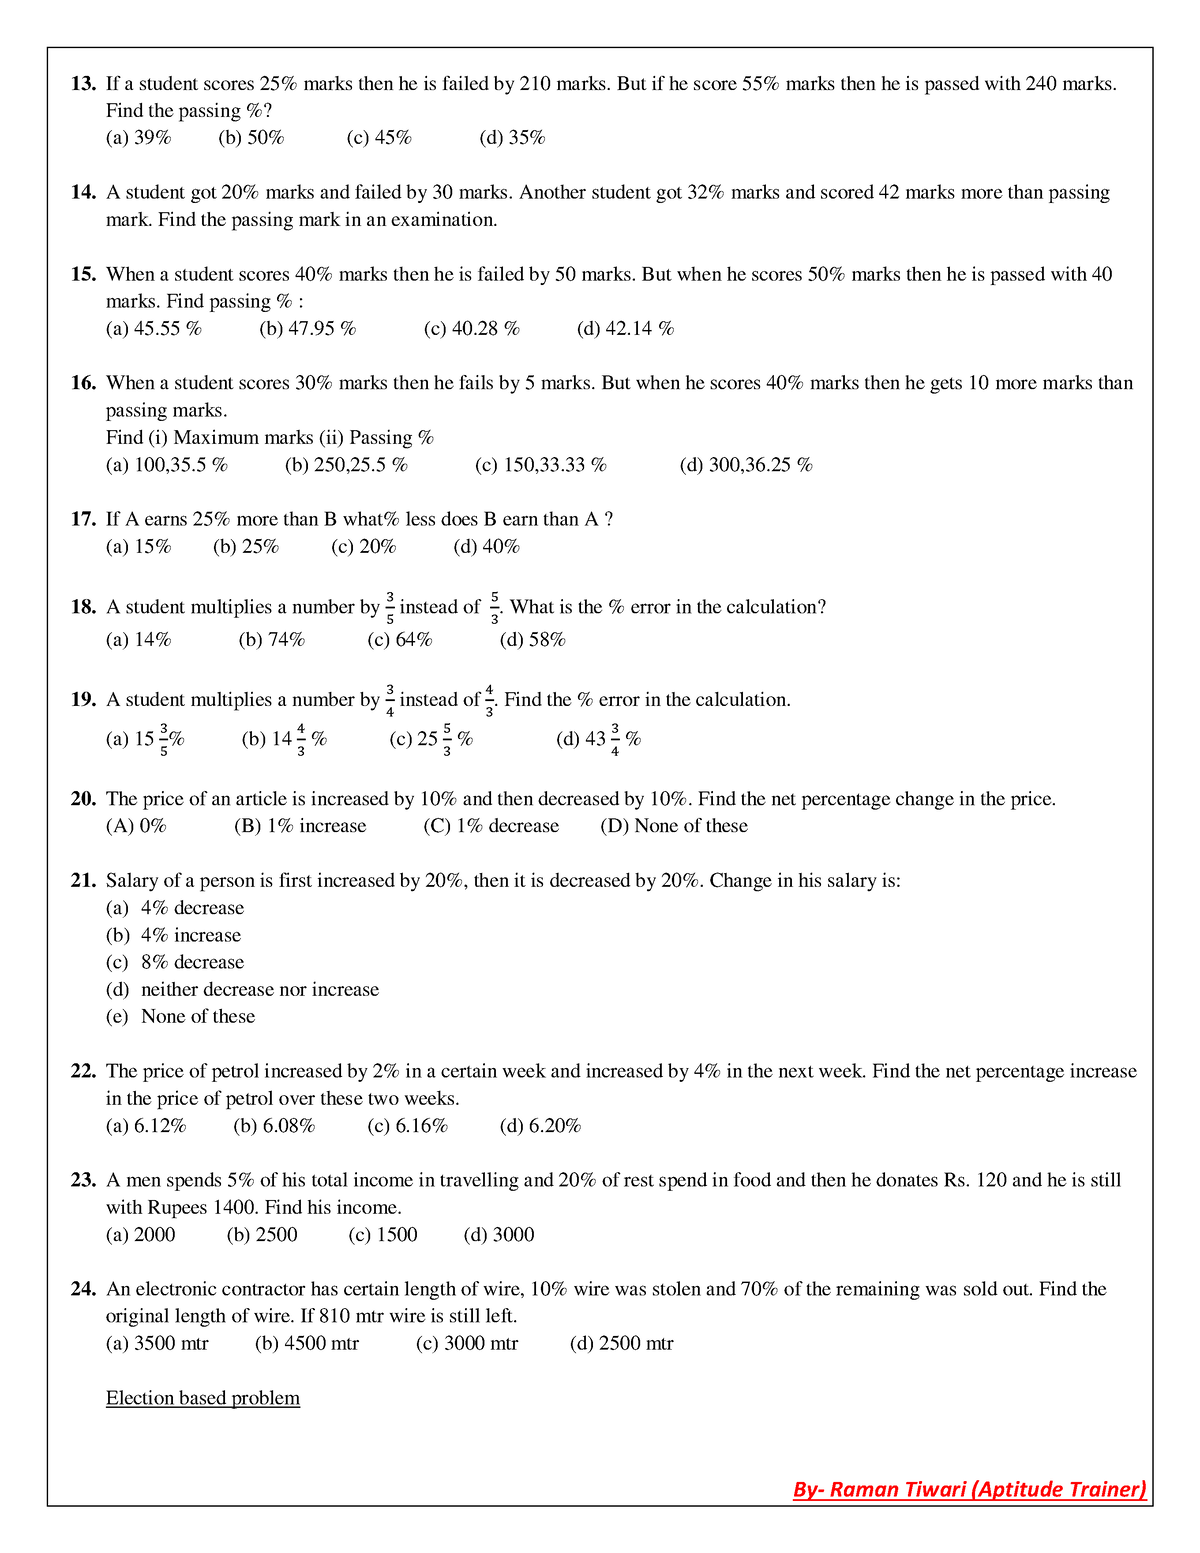 bba assignment answers pdf